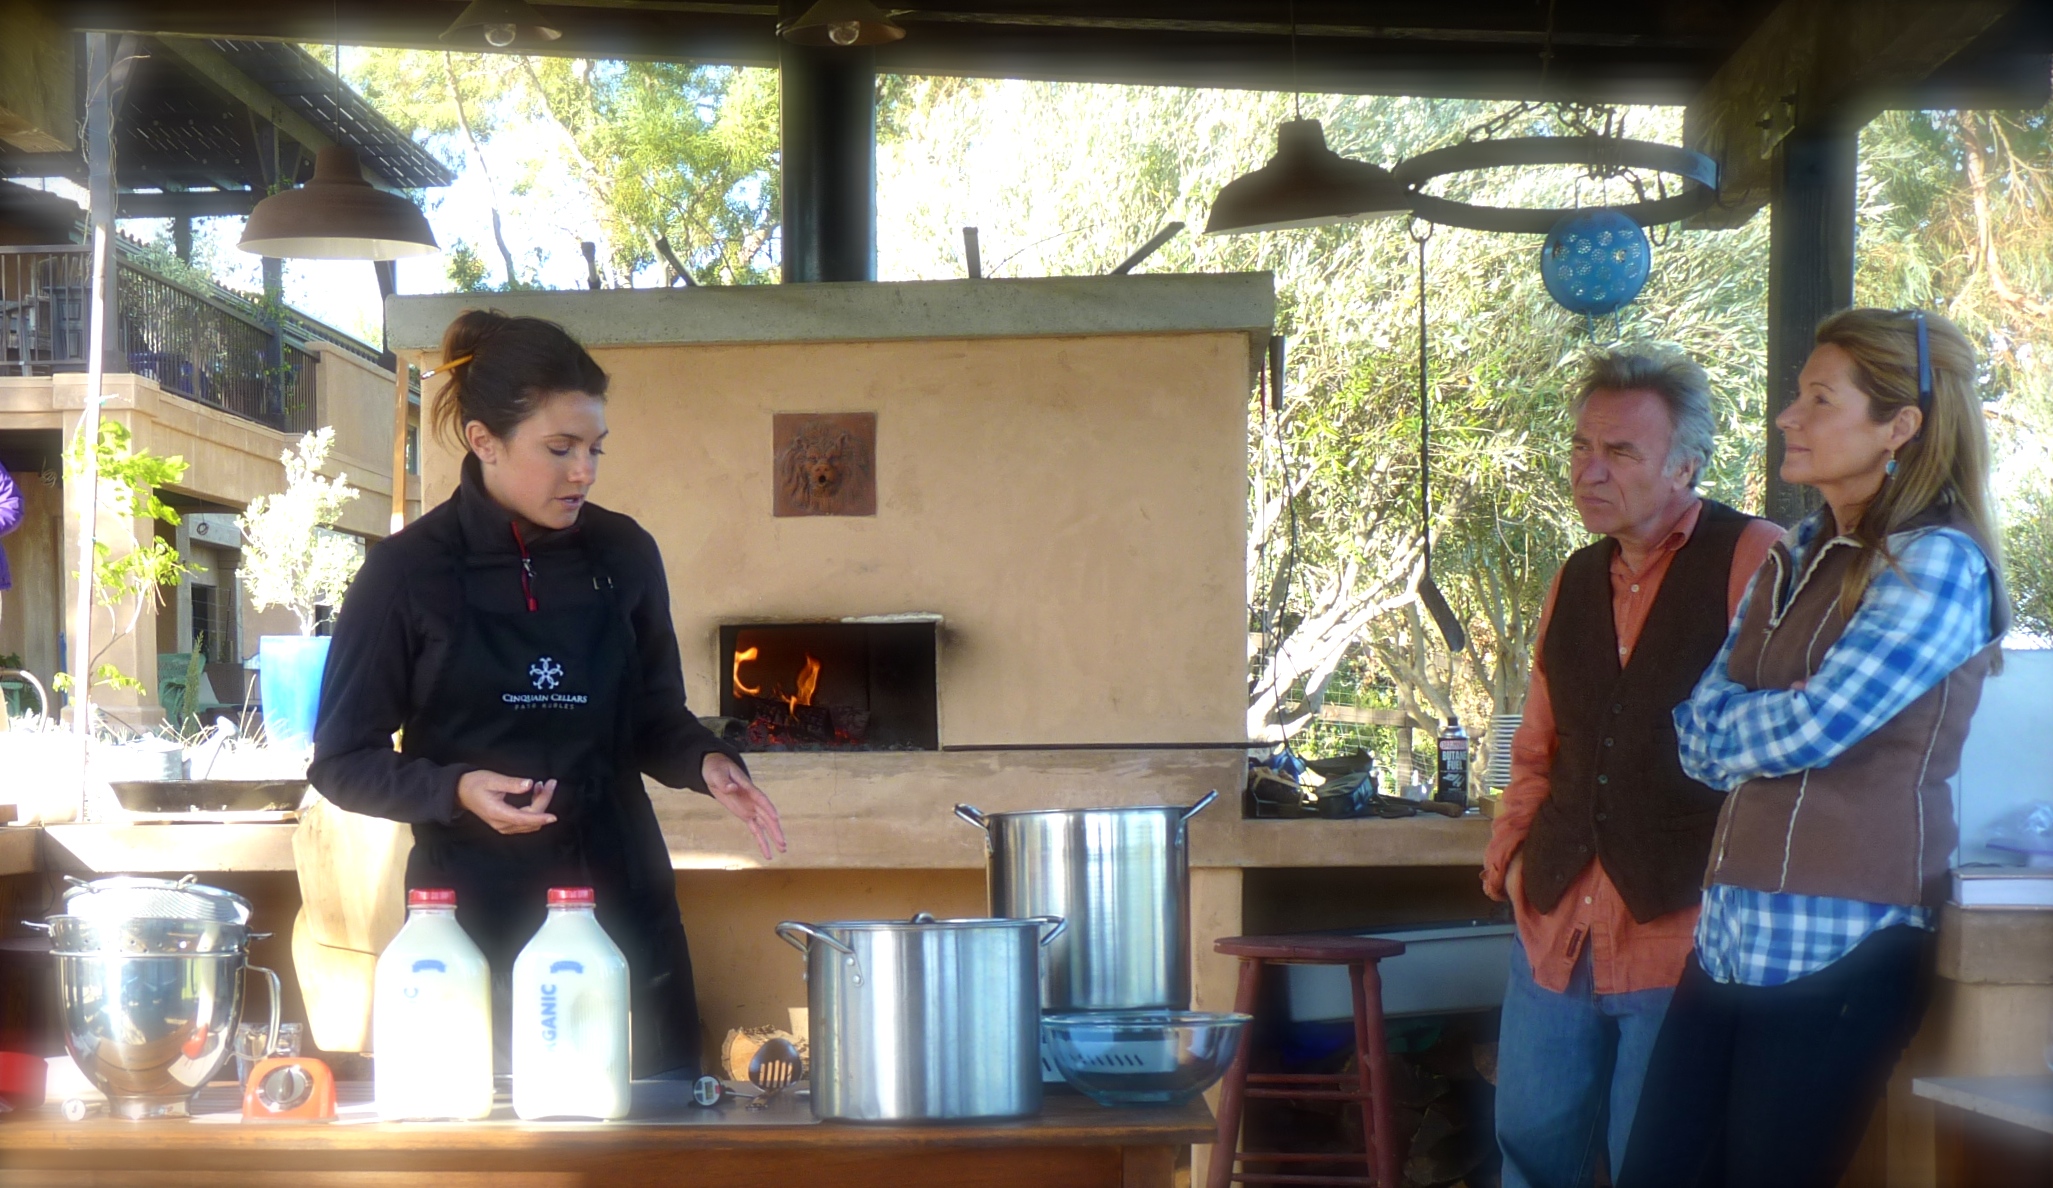 The most difficult thing about making ricotta cheese in an outdoor kitchen on a windy day is to keep the burner's flame lit. Brigit and her husband, Casey, try to block the wind! 